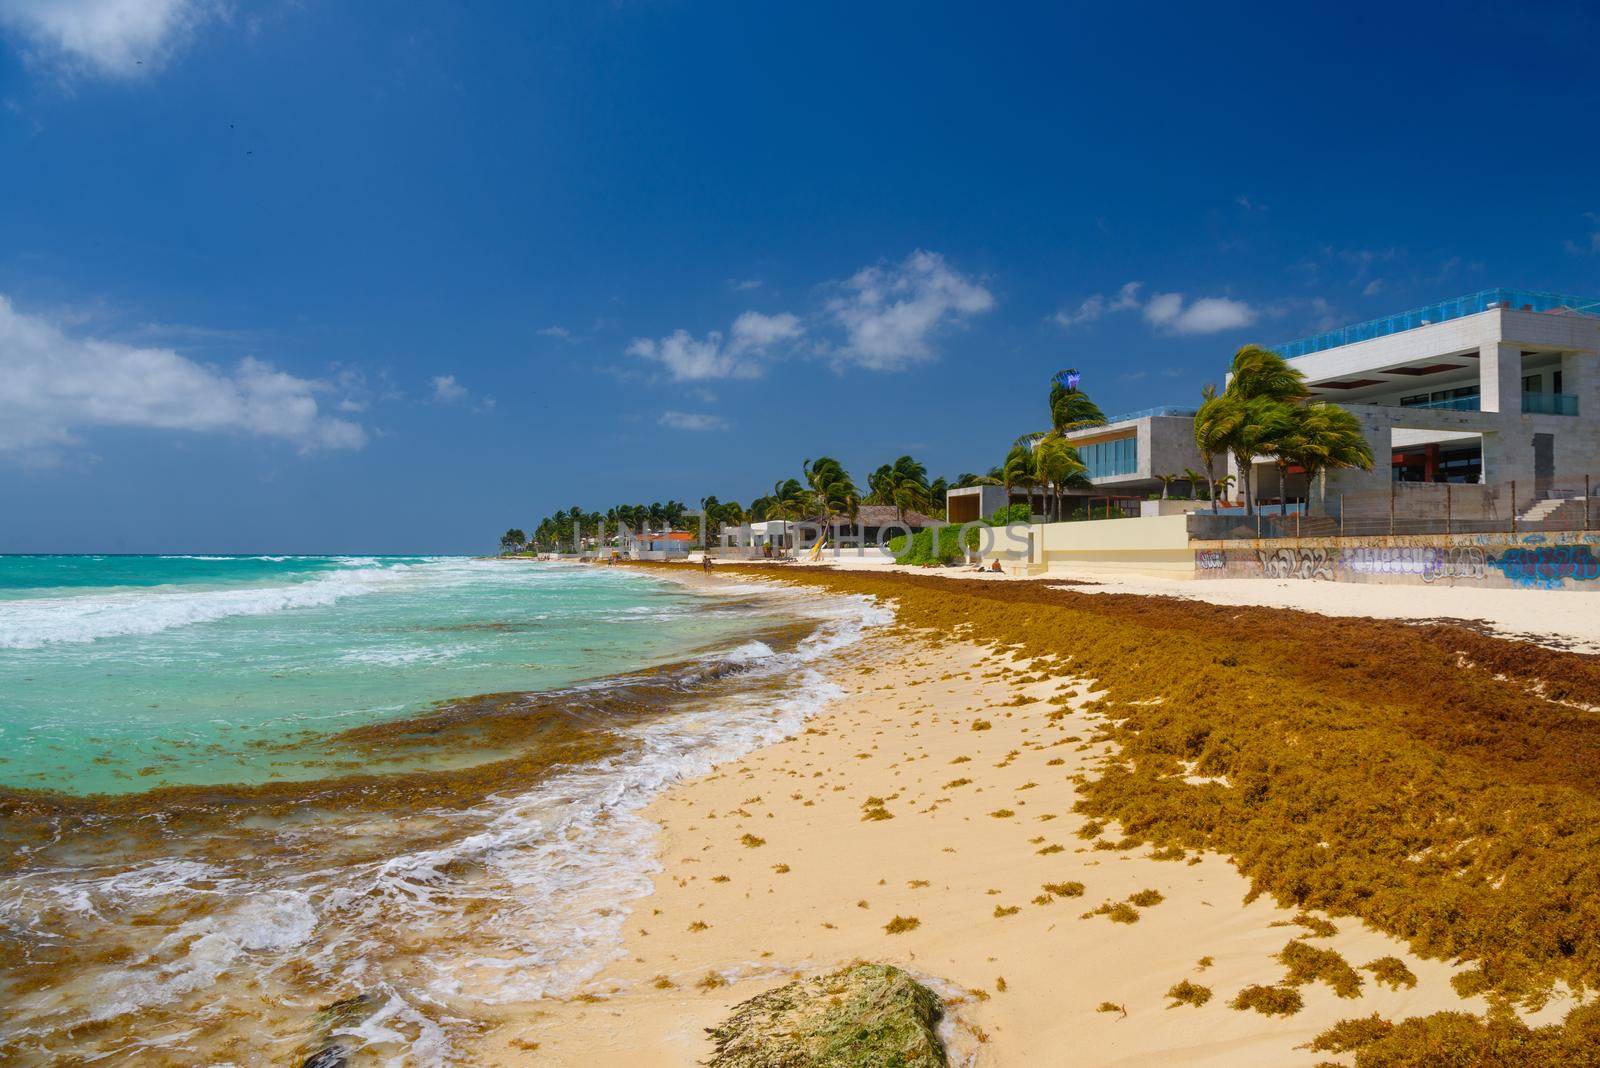 Sandy beach on a sunny day with hotels in Playa del Carmen, Mexico by Eagle2308